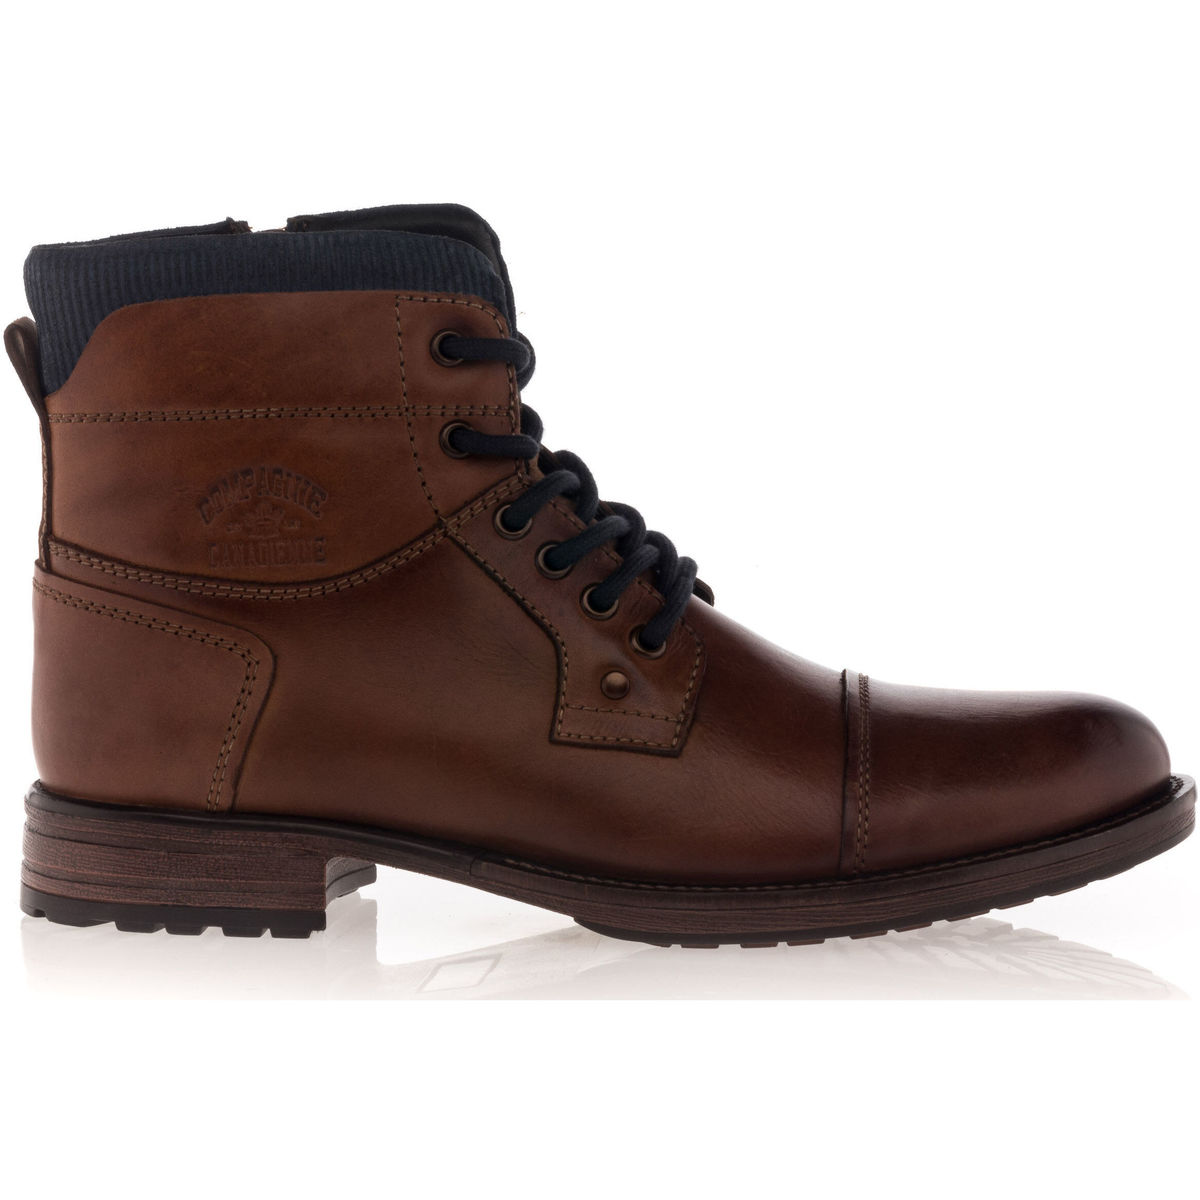 Chaussures Homme Paddington with Boots Boots / bottines Homme Marron Marron